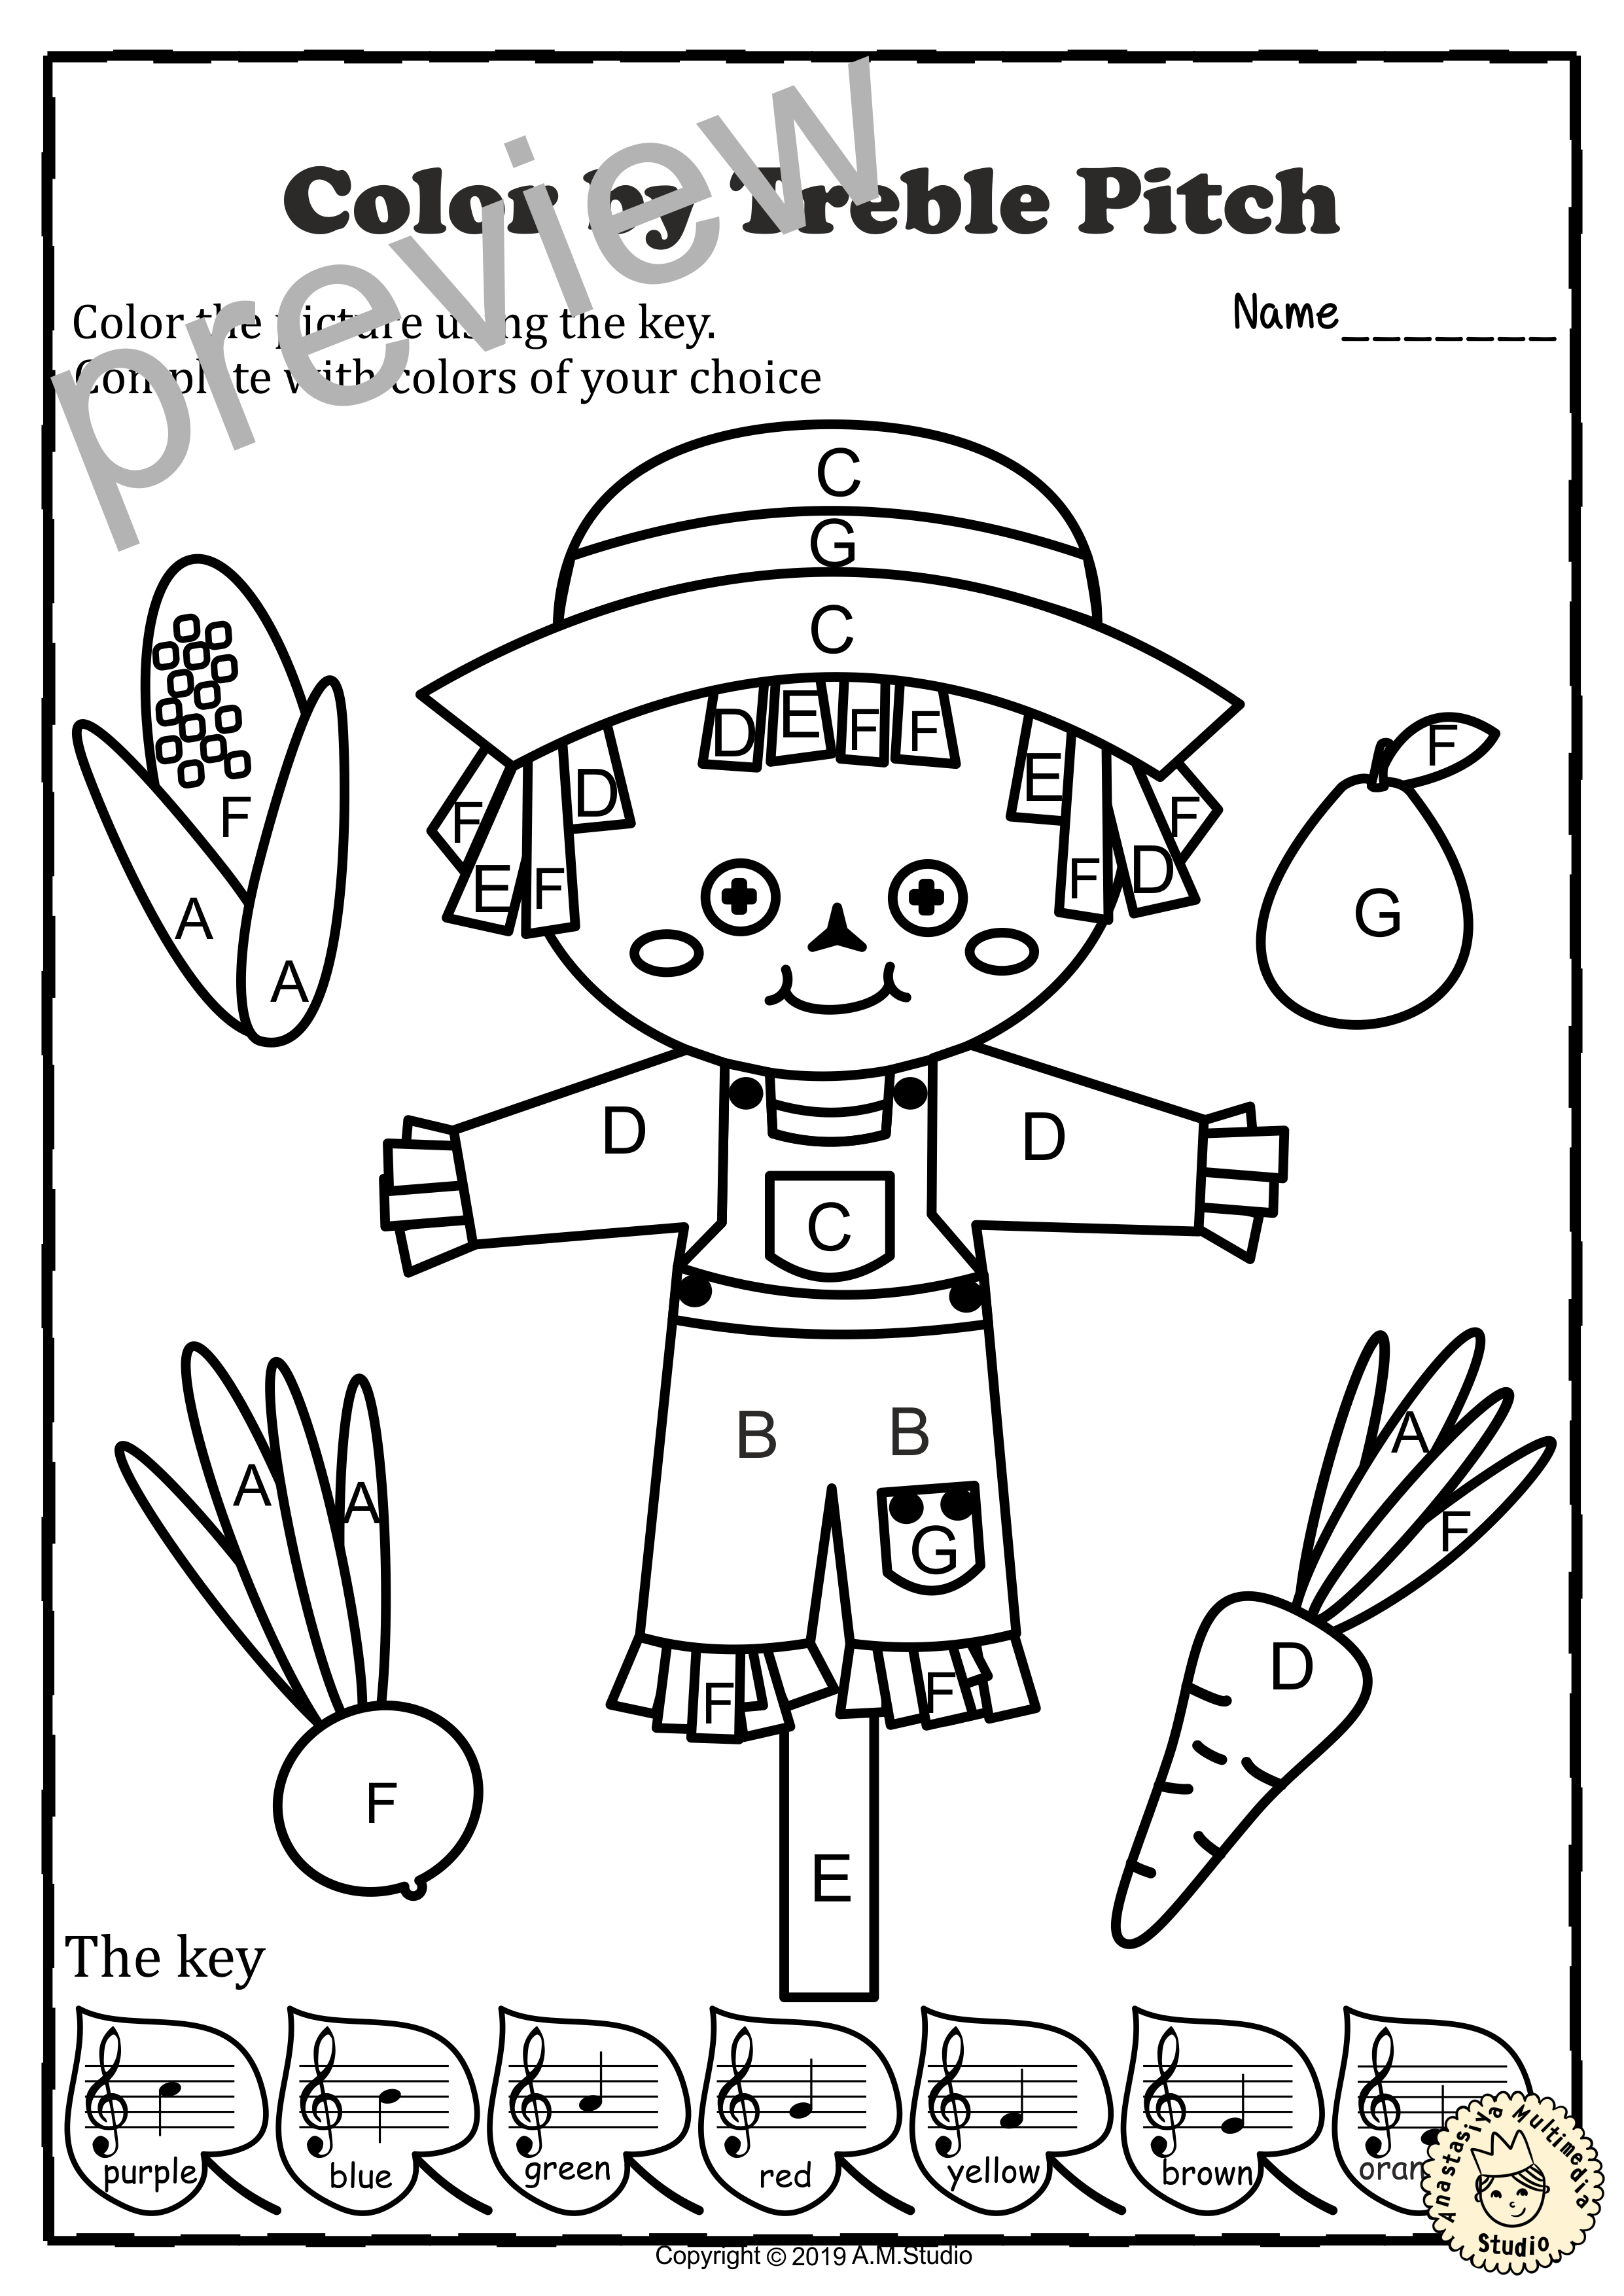 Musical Coloring Pages for Fall {Color by Treble Pitch} with answers (img # 1)